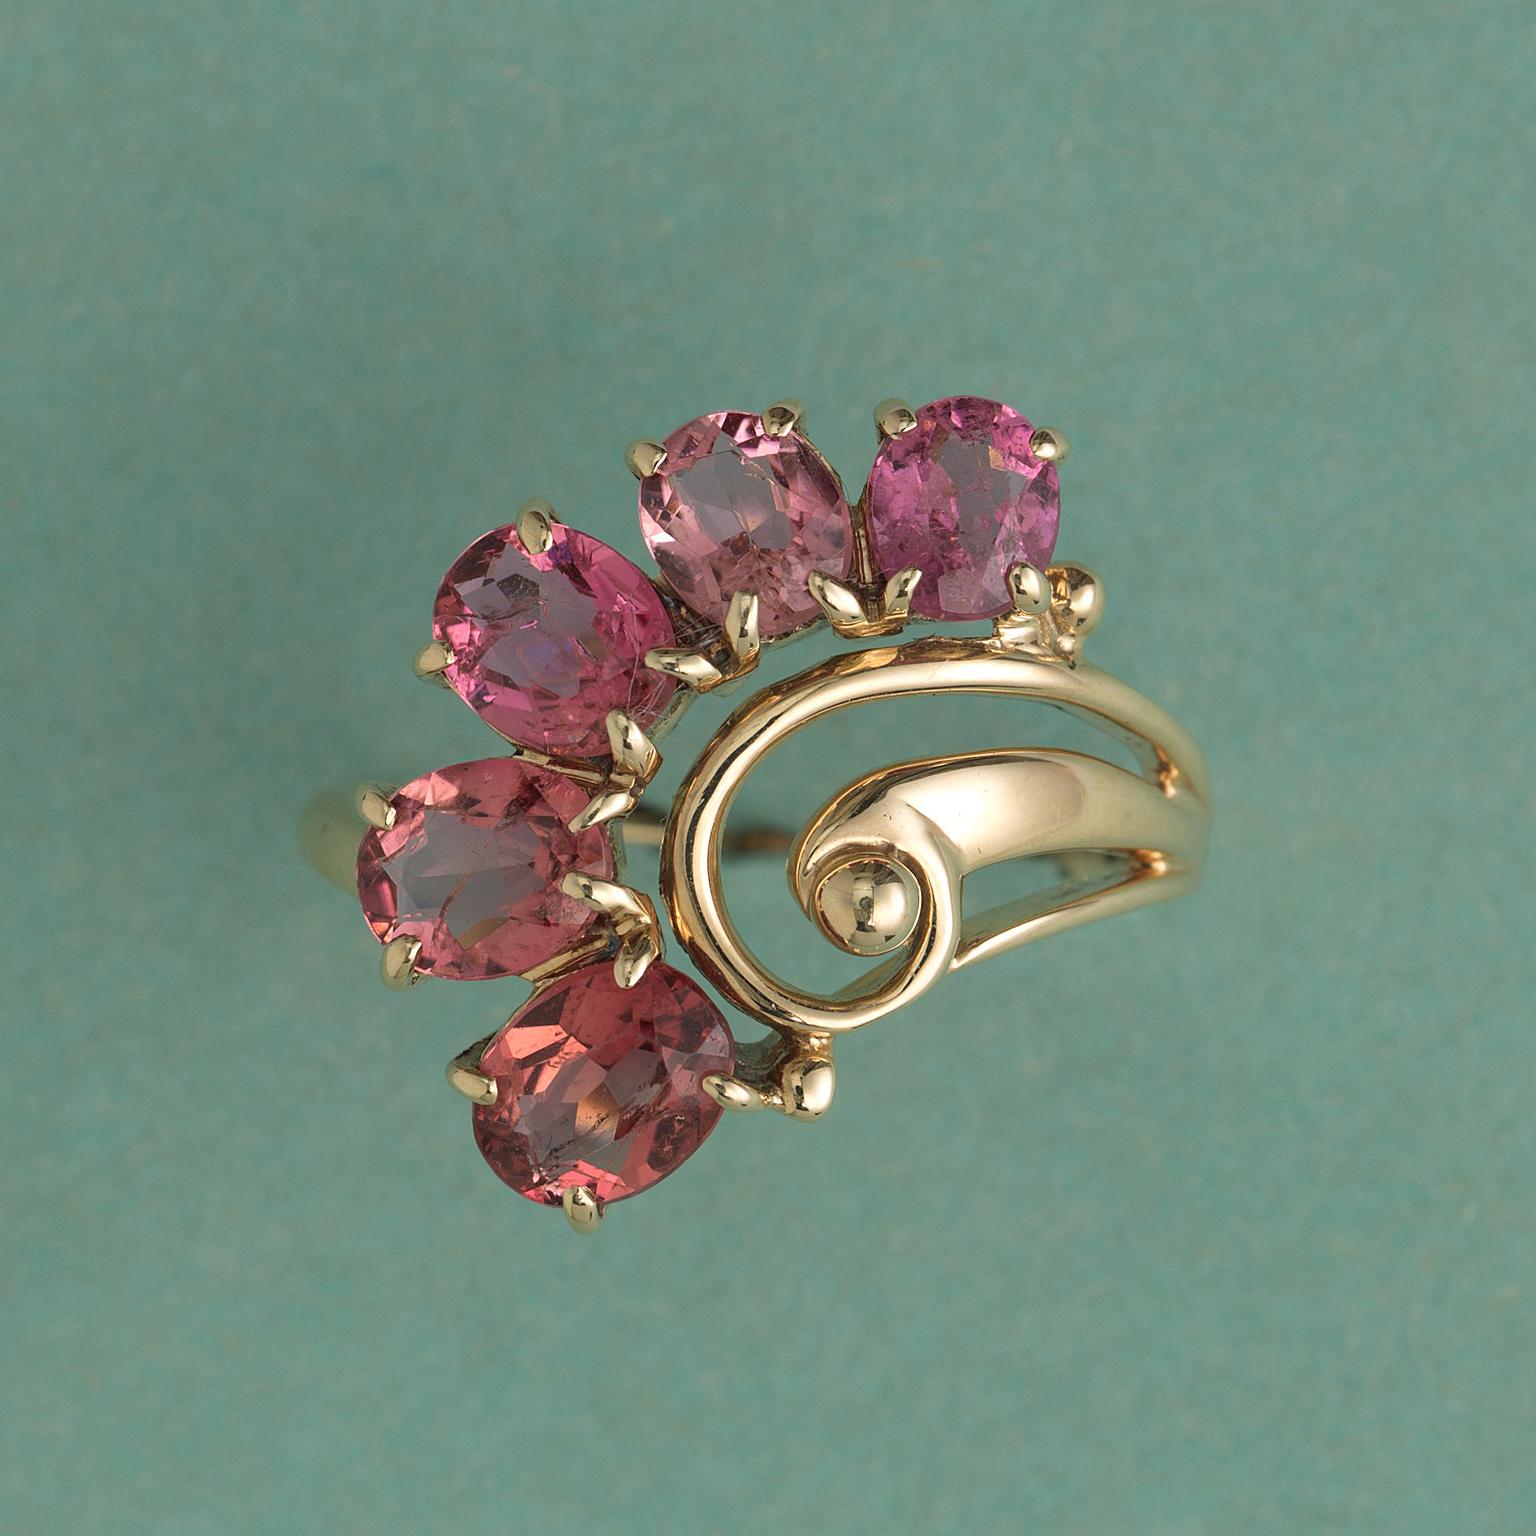 This 18 carat gold flower ring is set with five pink, oval facetted tourmalines beautifully graduating in size and color, design by Els Dieperink for the Dutch firm Gerritsen & van Kempen, circa 1950.

ring size: 18 mm. / 8 US.
weight: 4.51